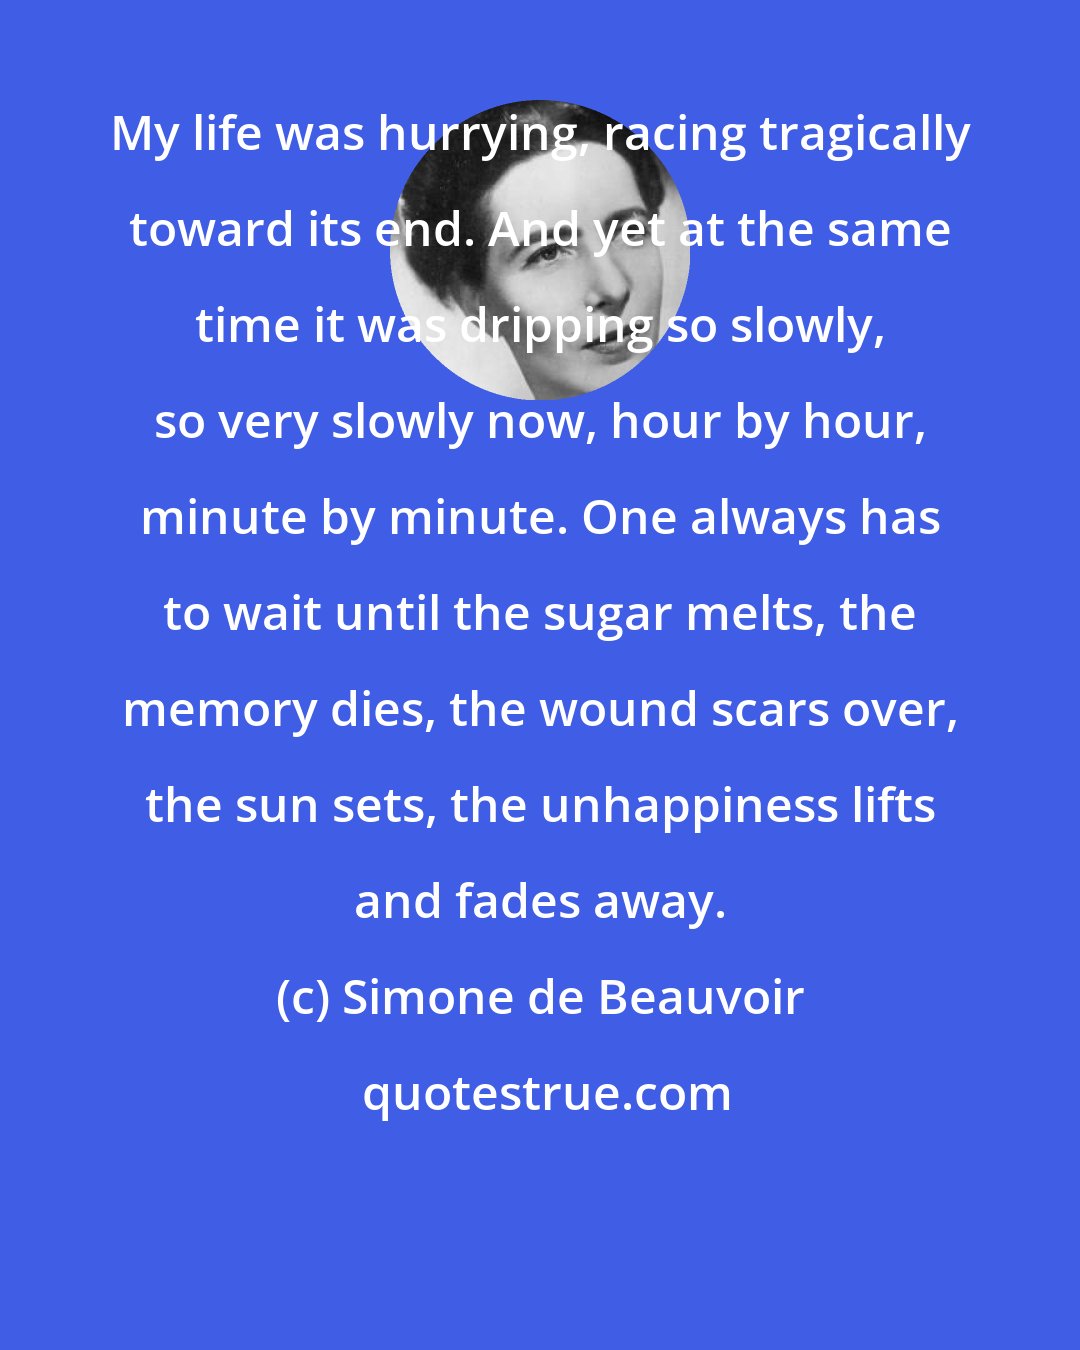 Simone de Beauvoir: My life was hurrying, racing tragically toward its end. And yet at the same time it was dripping so slowly, so very slowly now, hour by hour, minute by minute. One always has to wait until the sugar melts, the memory dies, the wound scars over, the sun sets, the unhappiness lifts and fades away.